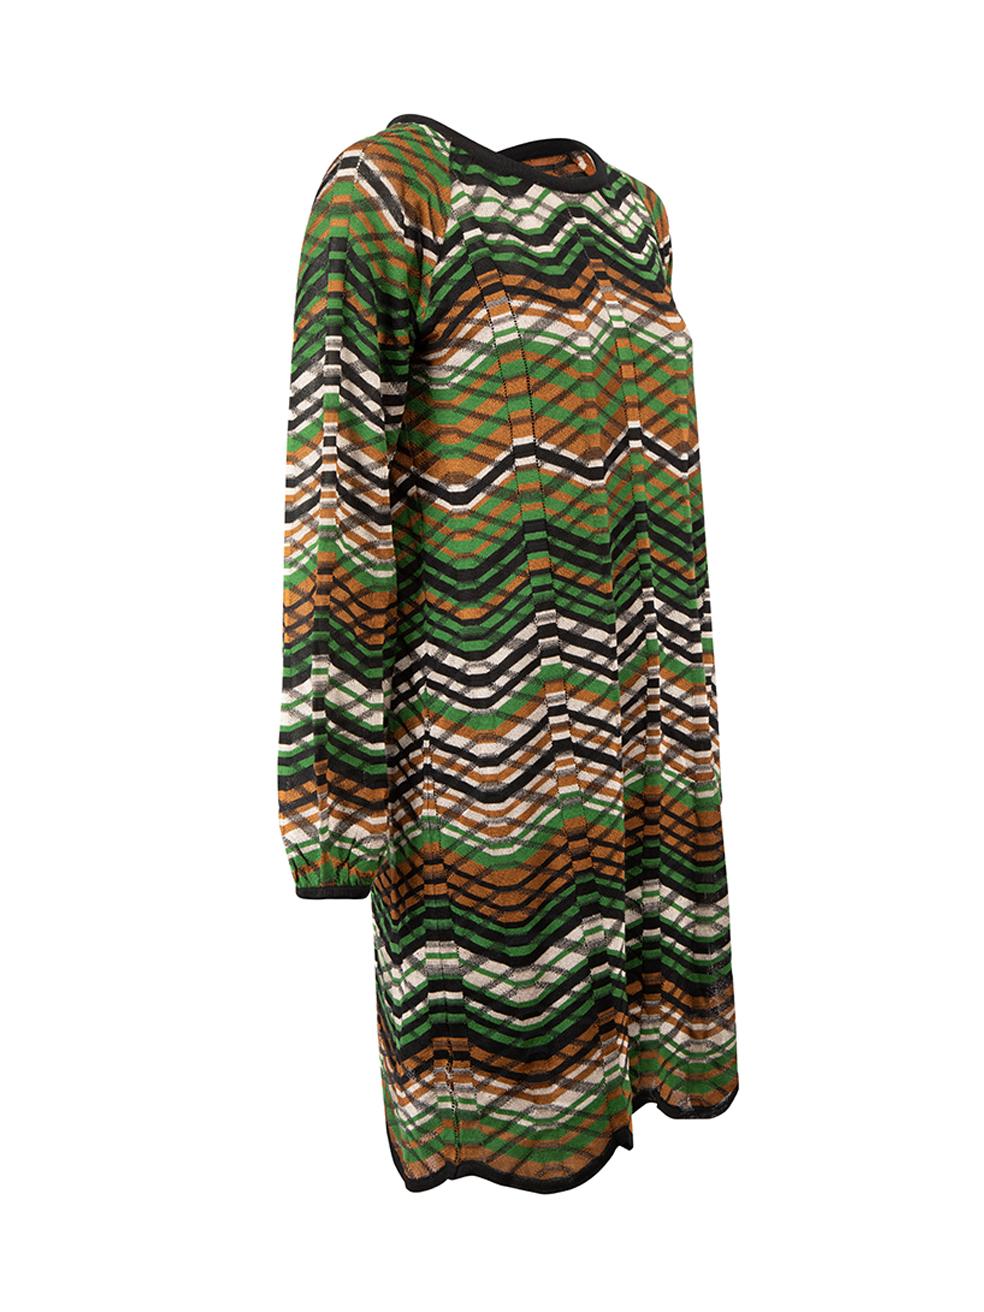 CONDITION is Very good. Hardly any visible wear to dress is evident on this used M Missoni designer resale item. 



Details


Multicolour- Green tone

Synthetic

Mini knit dress

Zig zag pattern

Round neckline

Comes with black slip